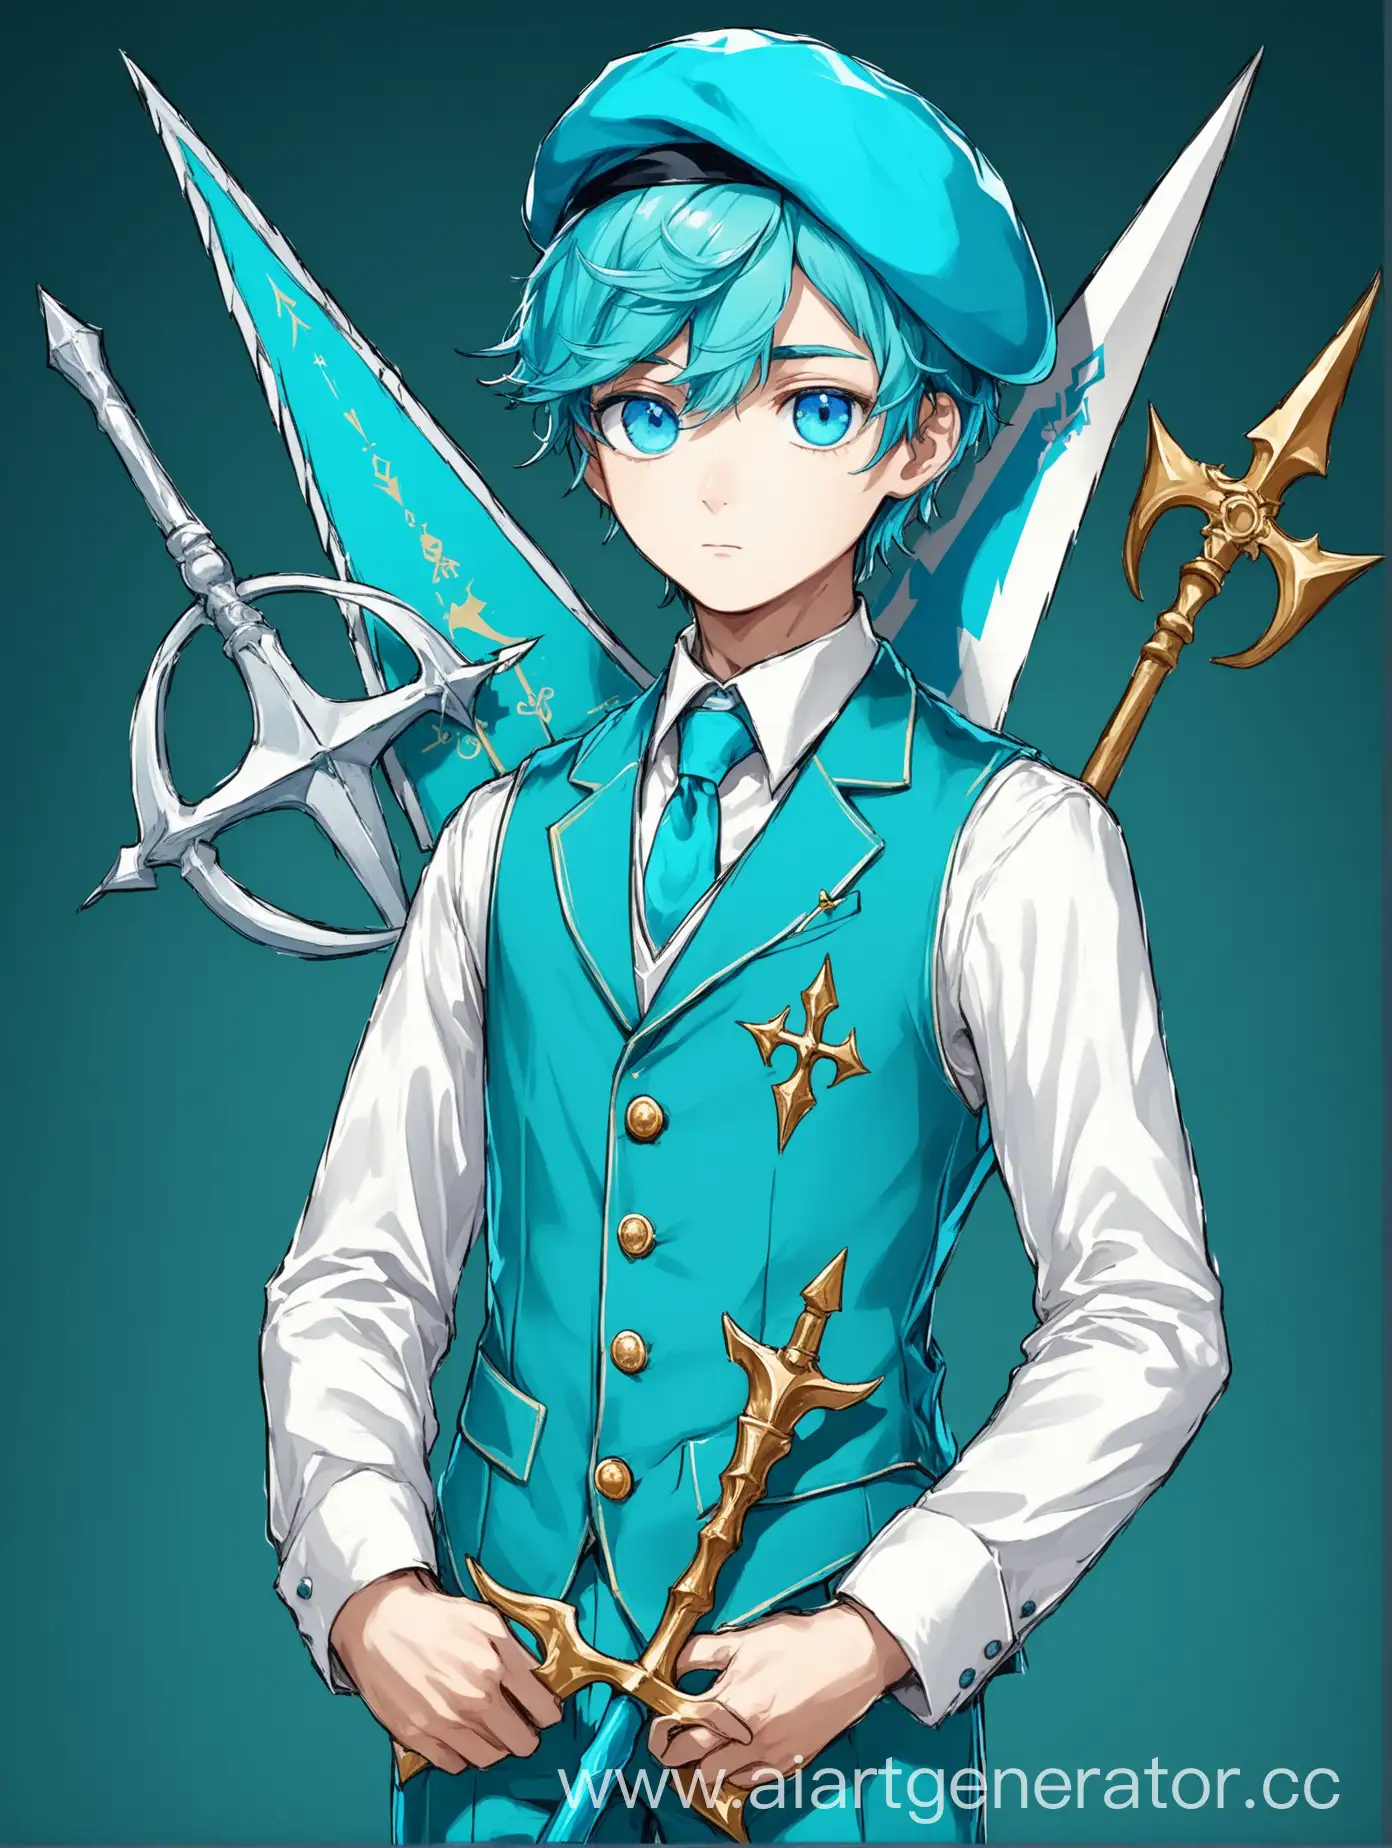 Saint-Boy-with-Halberd-in-Blue-and-Turquoise-Attire